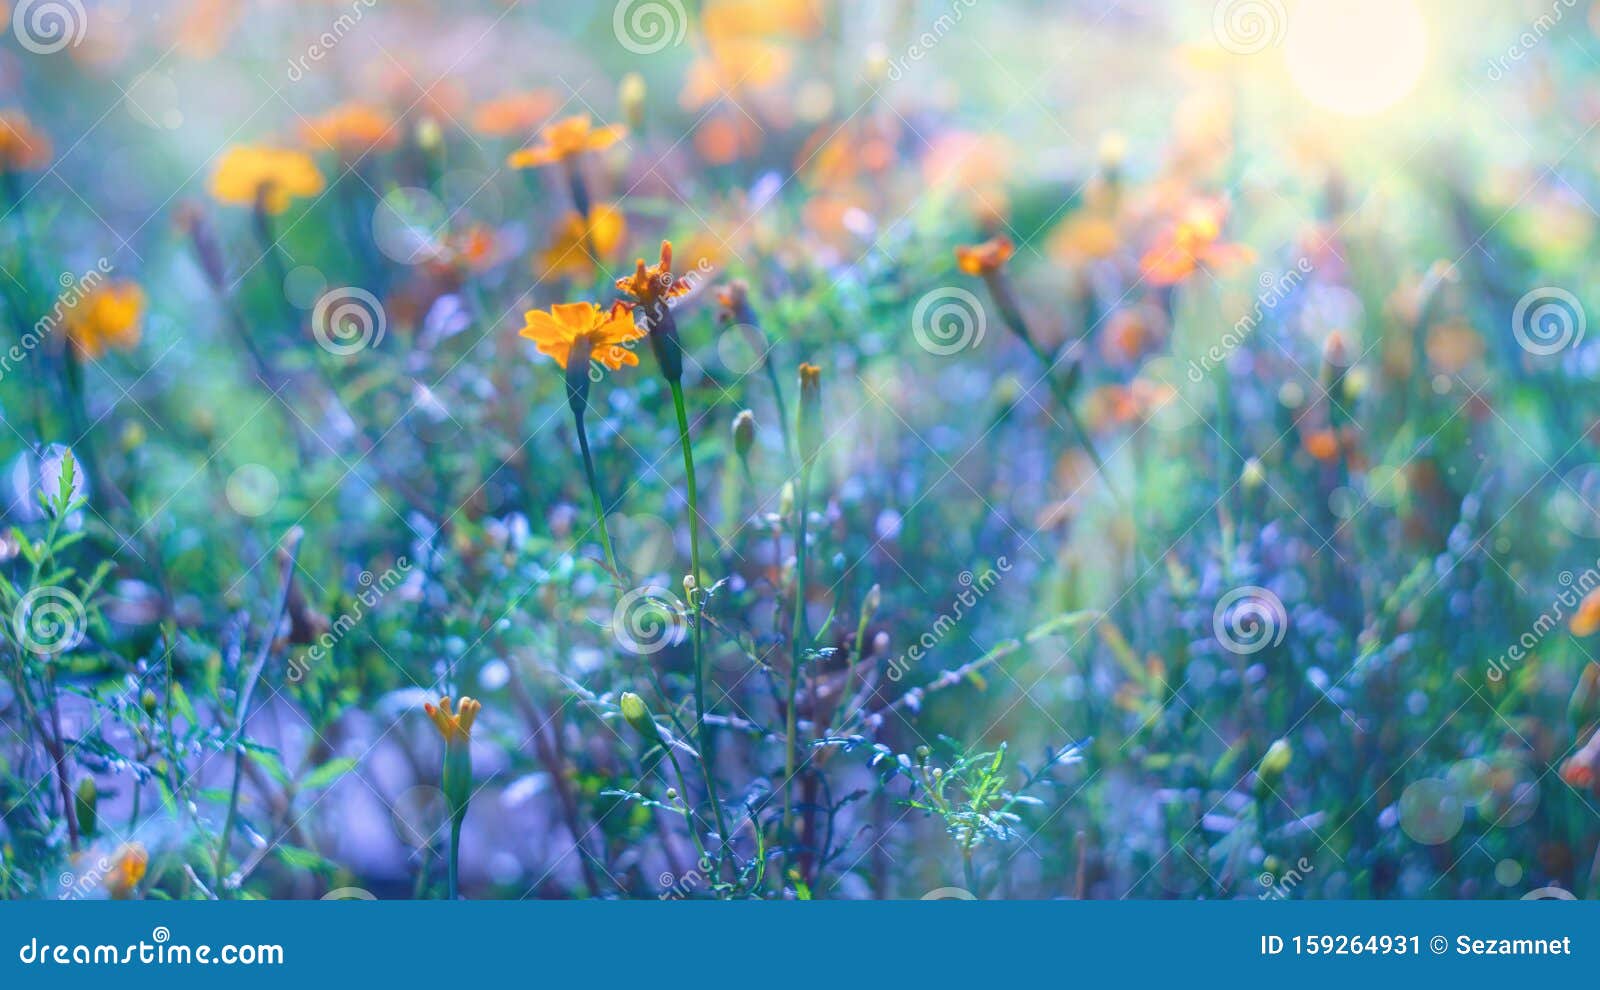 Flower Background Autumn Flowers Marigolds Sunset Beautiful Landscape Of Cold Blue And Warm Orange Stock Image Image Of Brown Drink 159264931,What A Beautiful Name Piano Chords Key Of C